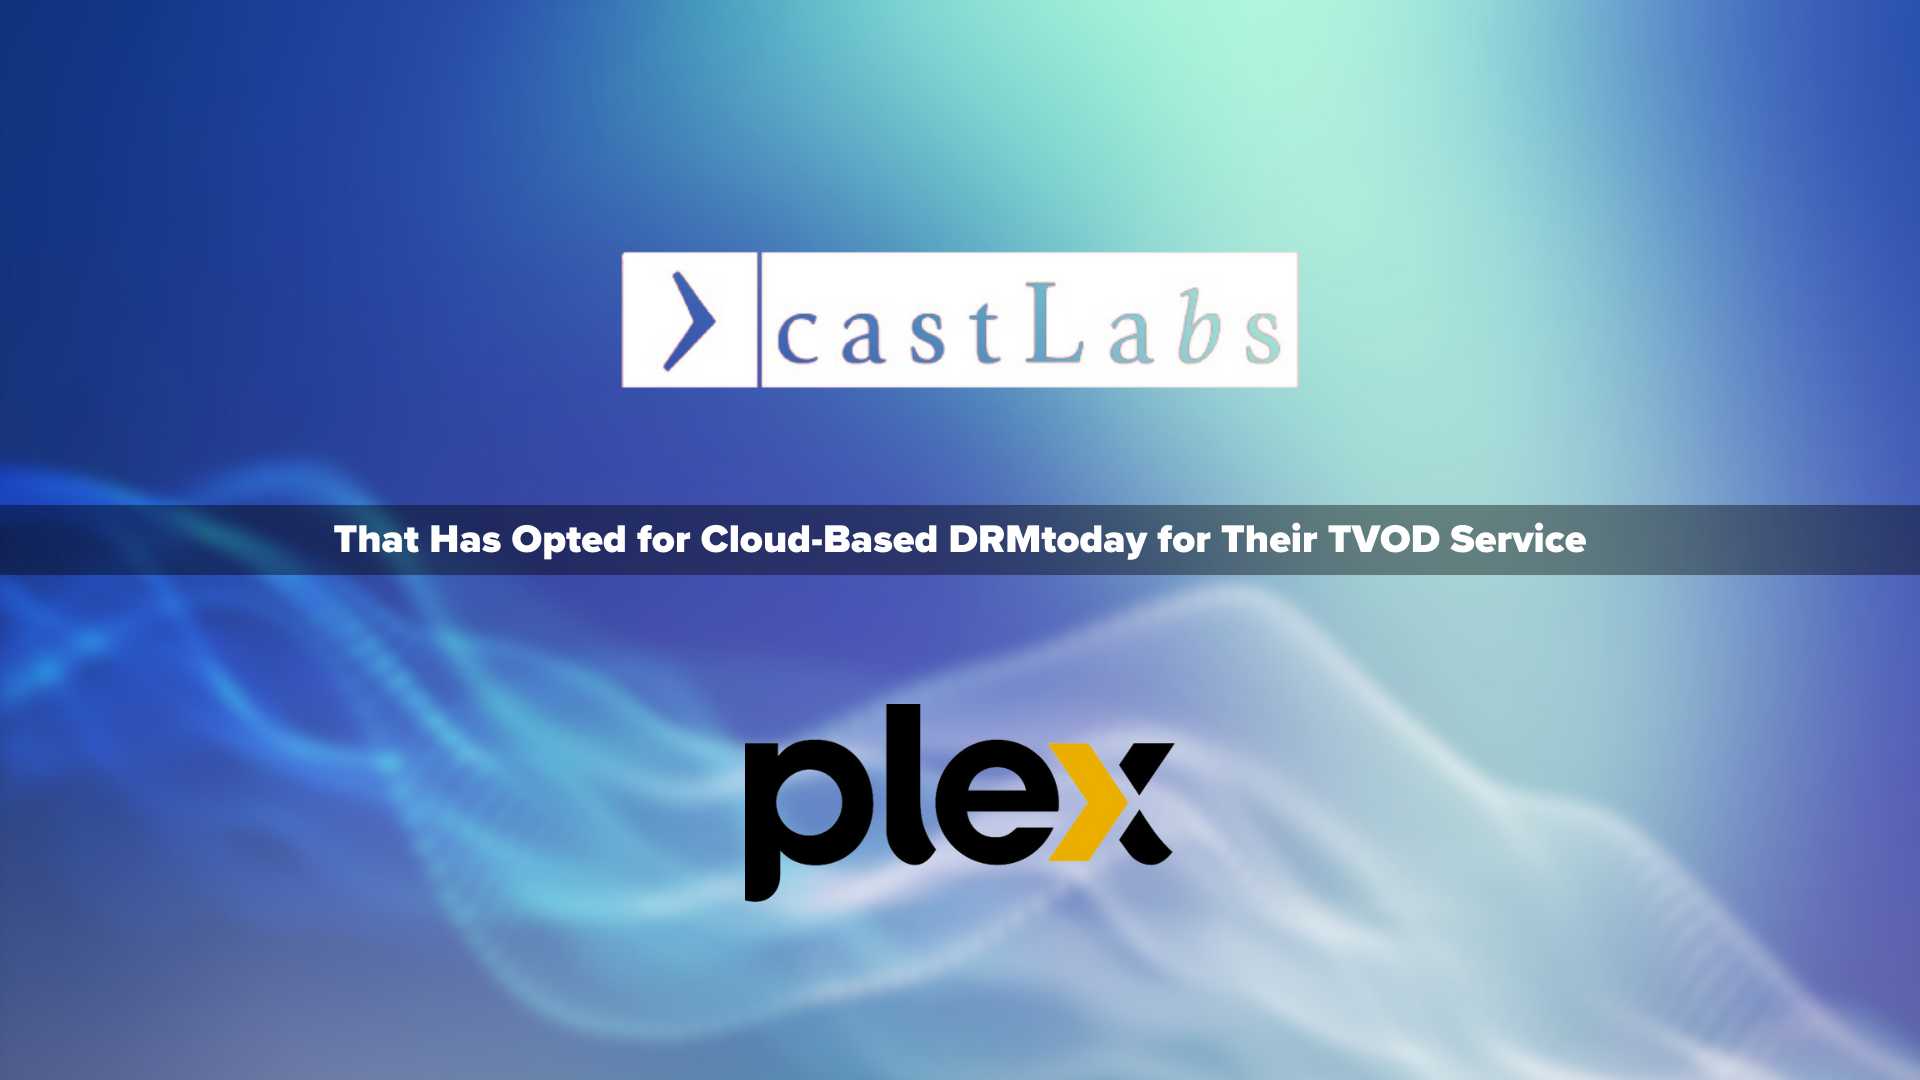 Plex releases new TVOD service supported by castLabs' DRMtoday and Synamedia's ContentArmor forensic watermarking